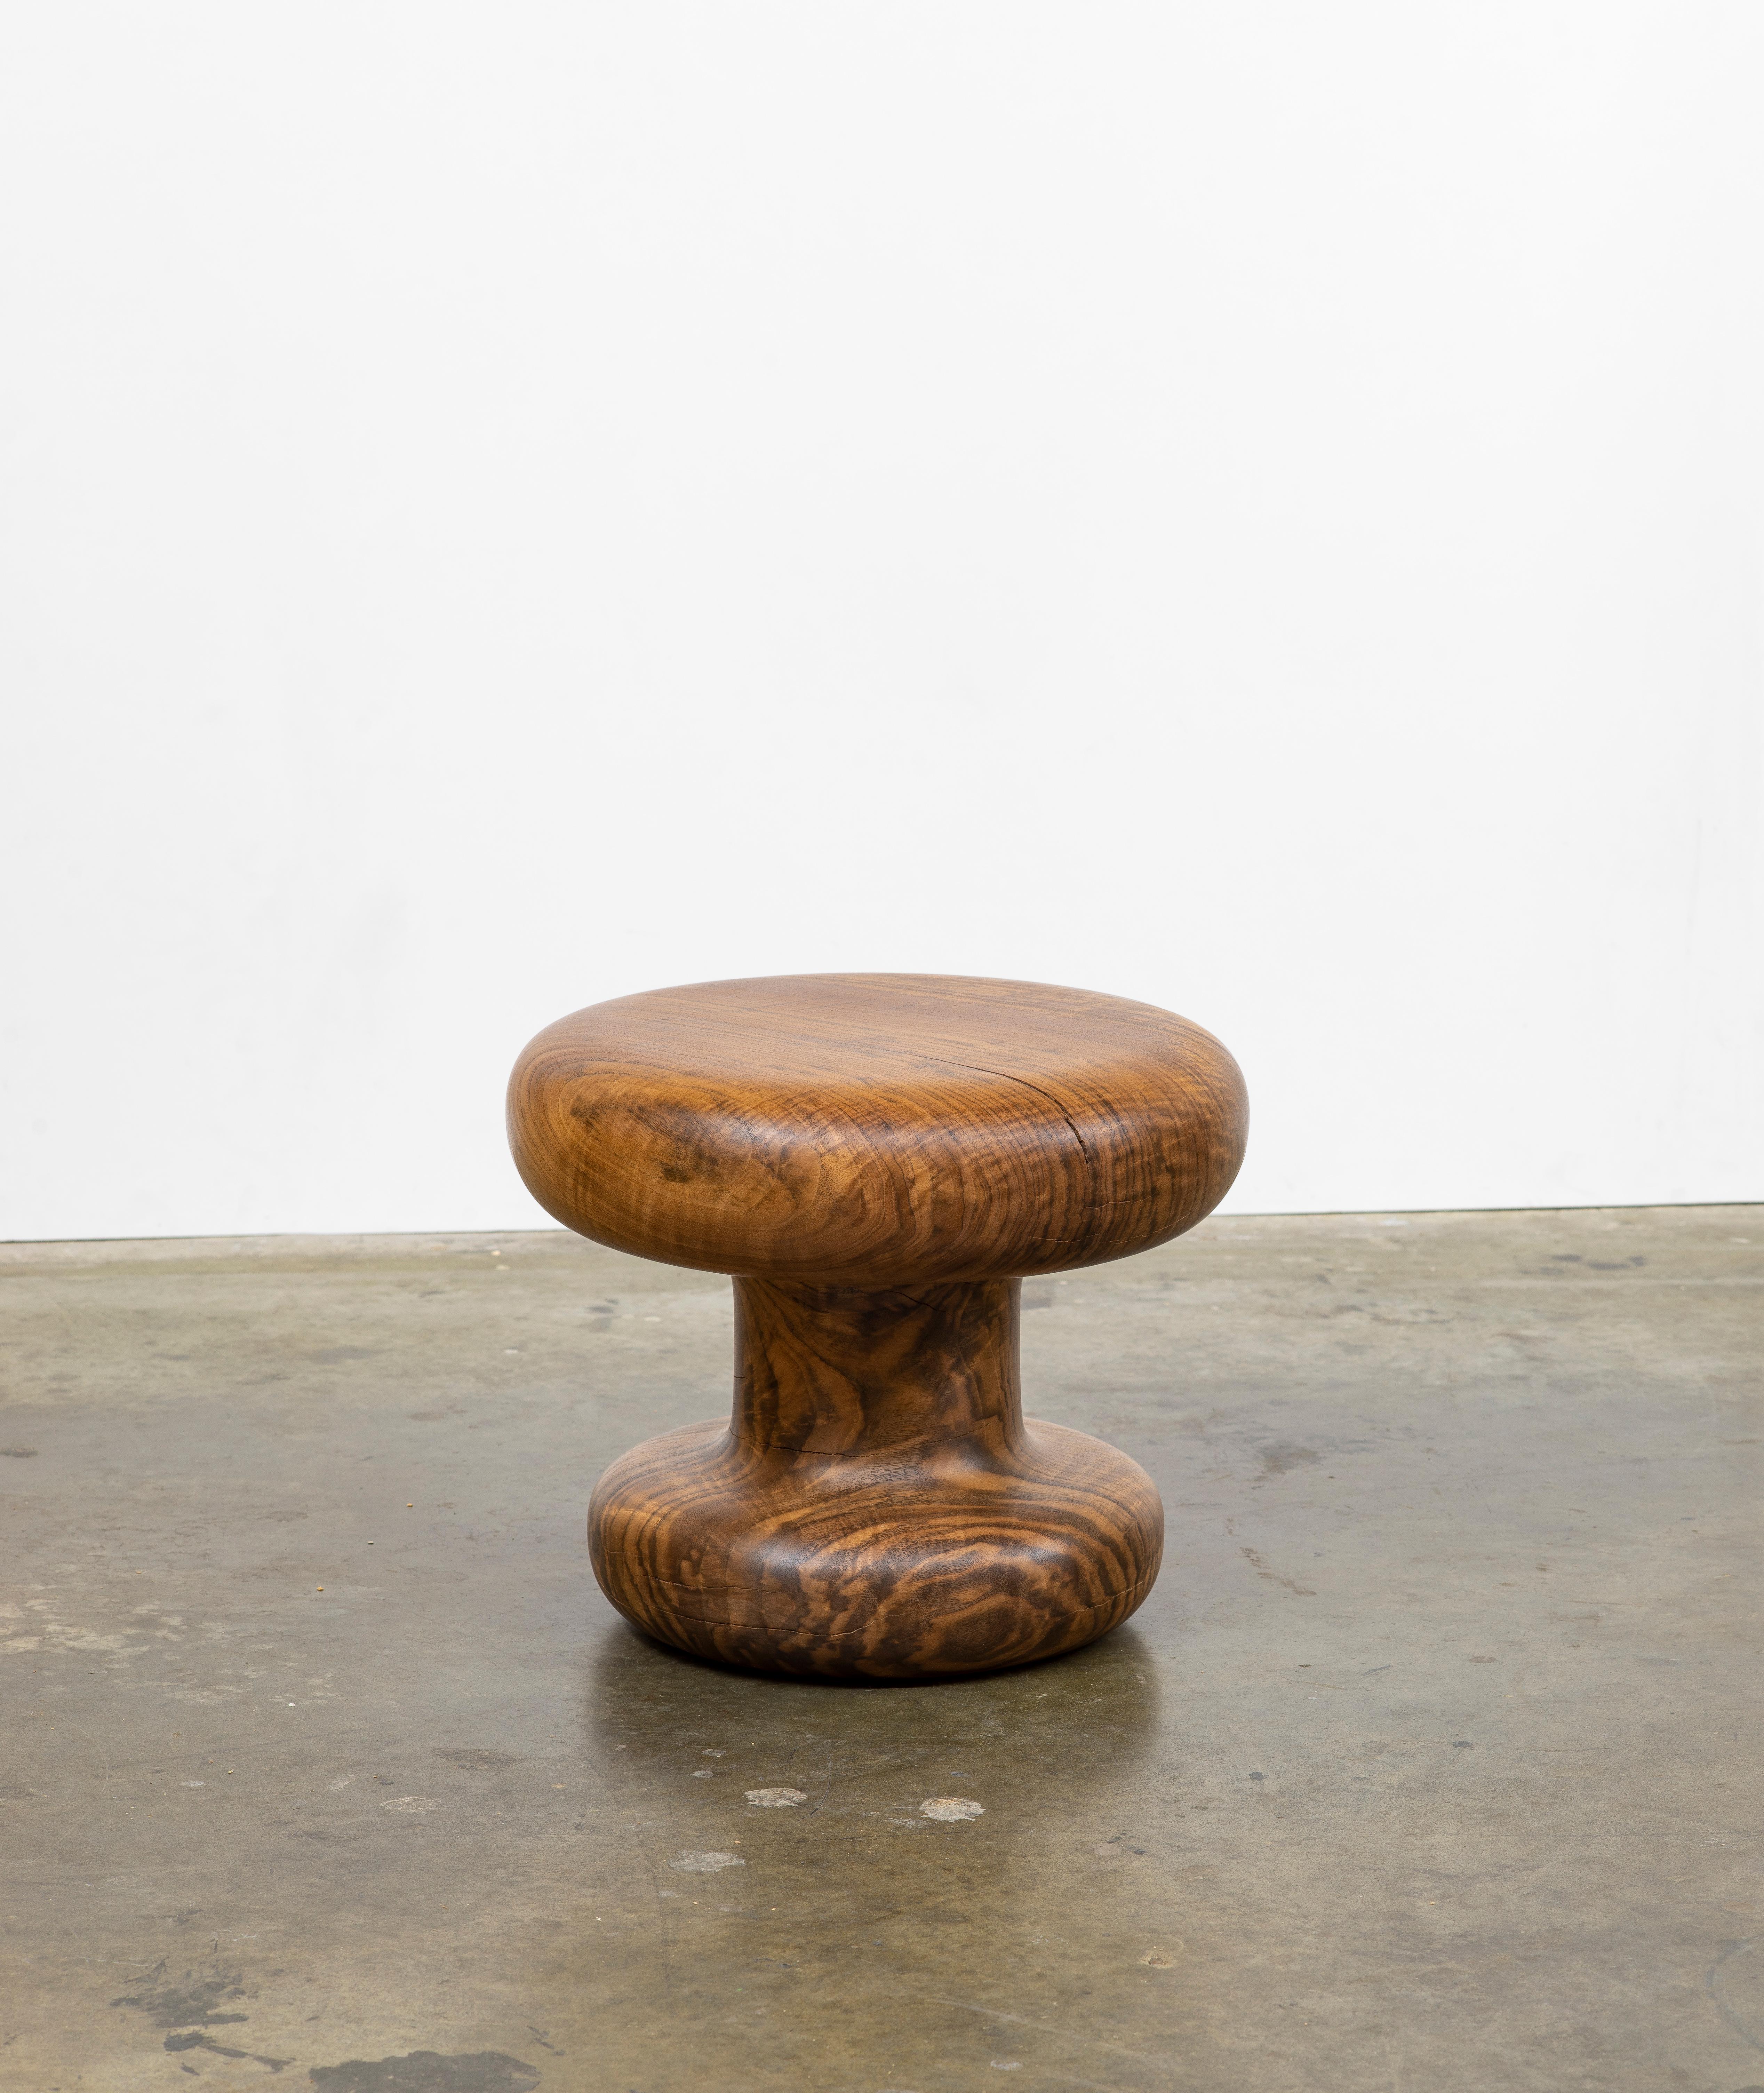 Los Angeles–based artist Christopher Norman's work explores the traits of molded forms executed in exceptional woods. In any setting, they call out to be used and enjoyed. Each item is one solid piece of wood; because of the nature of nonindustrial